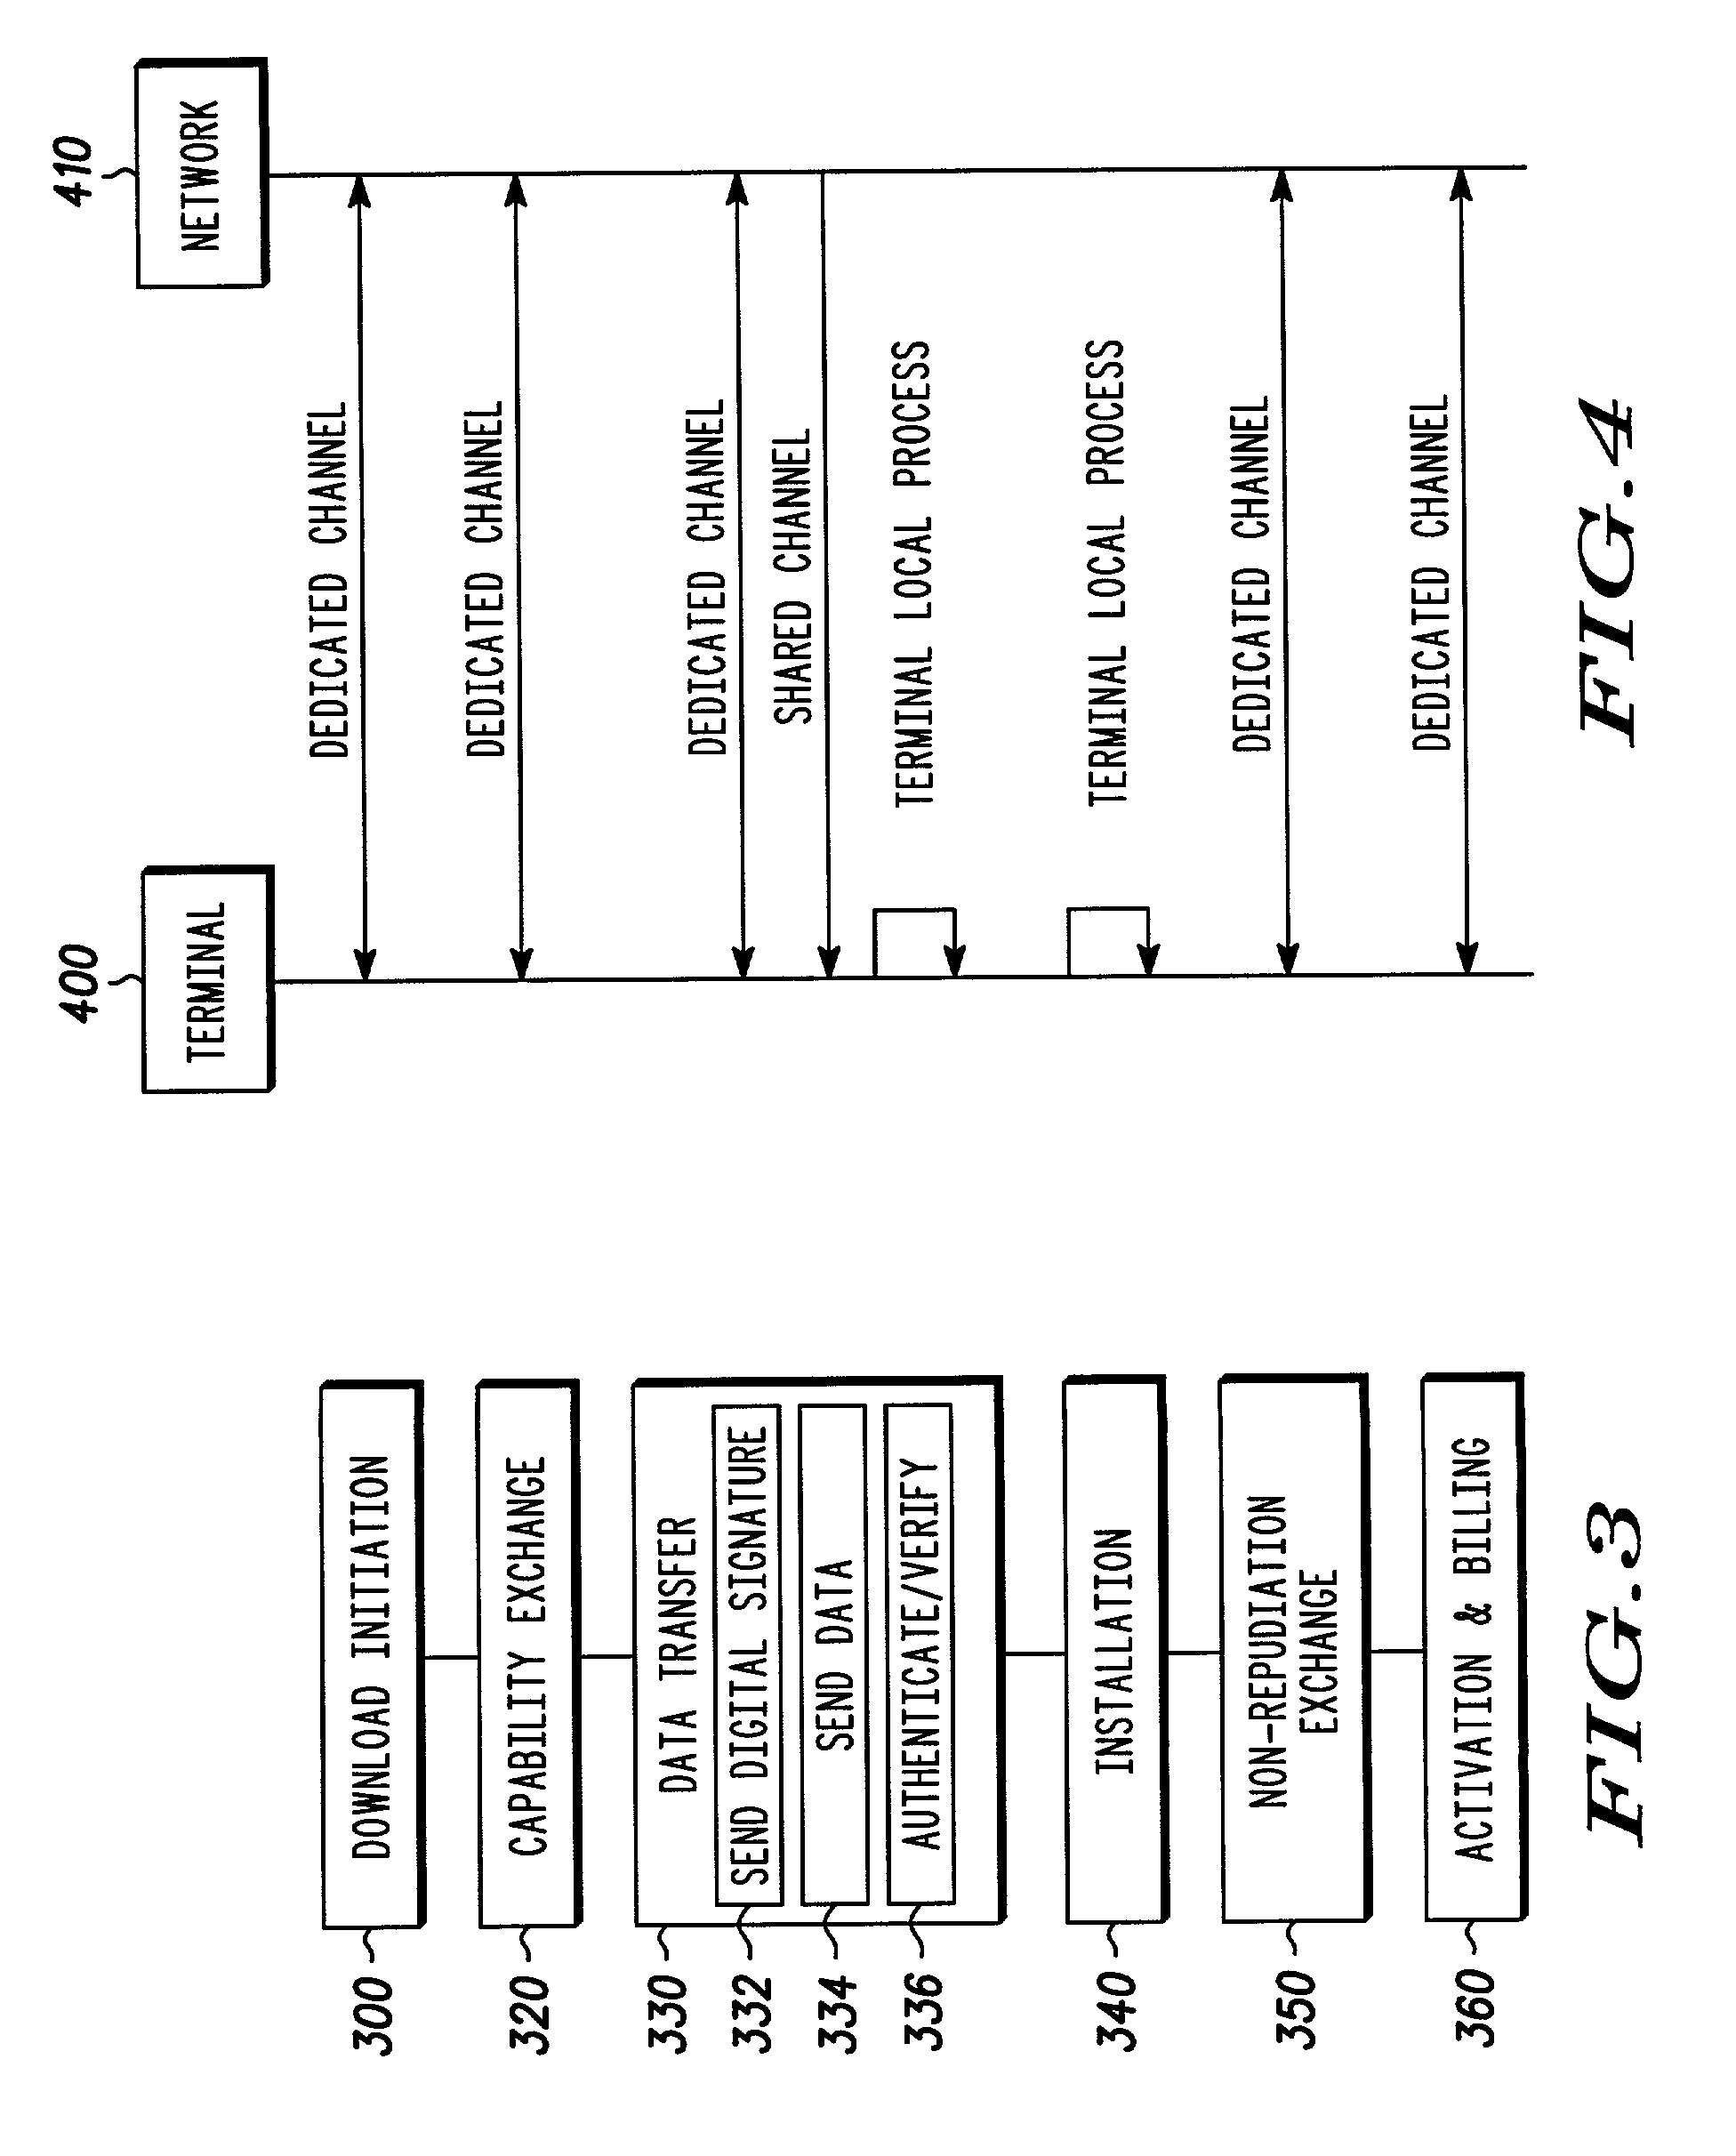 Software content downloading methods in radio communication networks